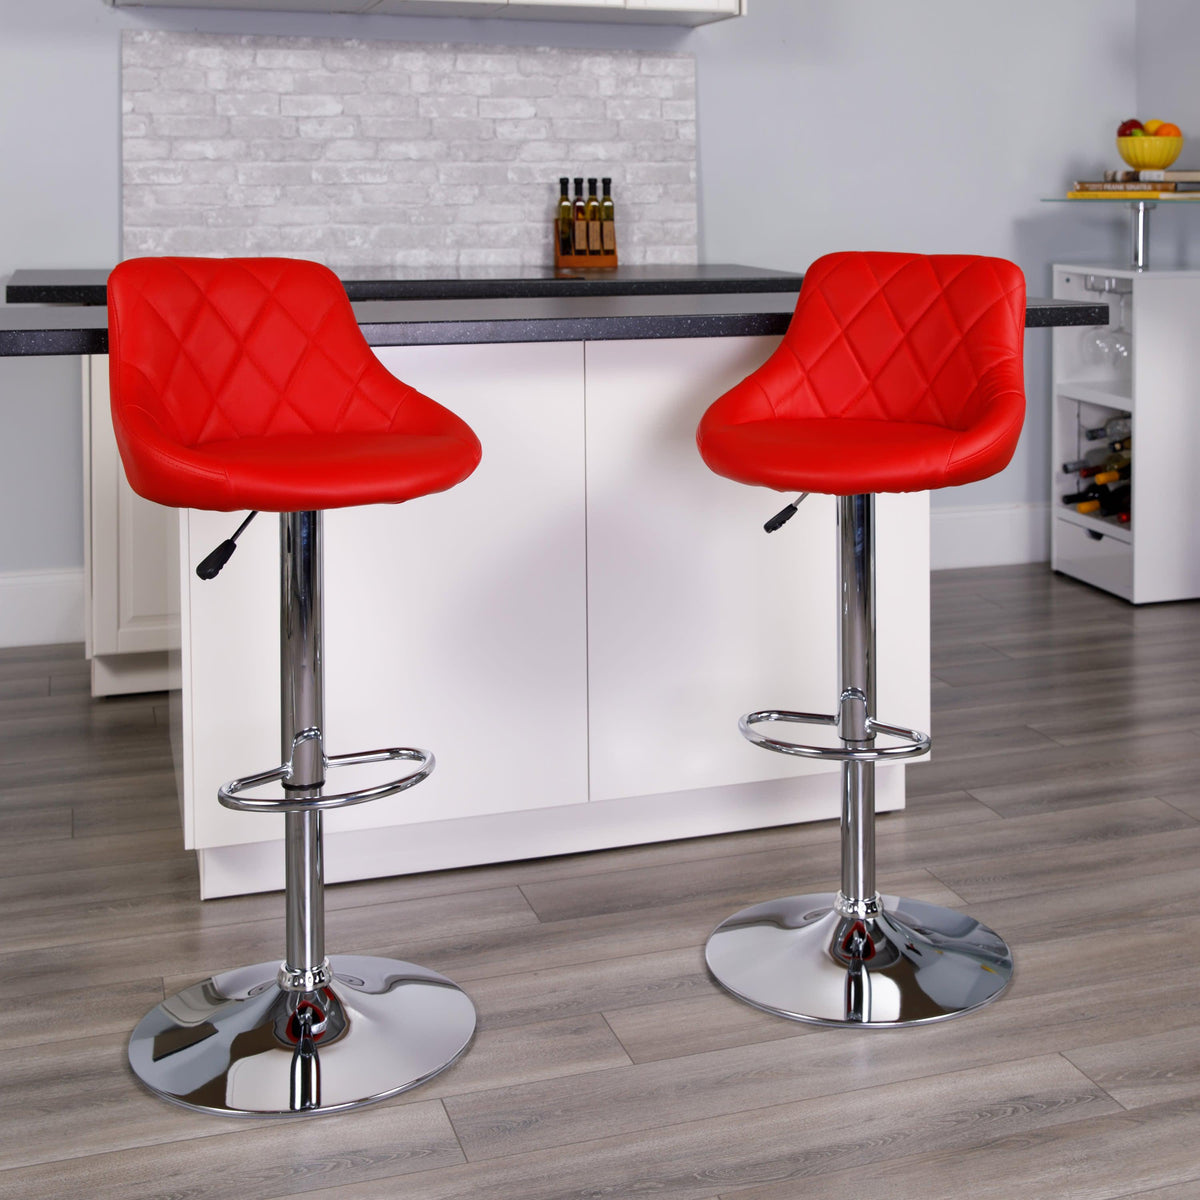 Red |#| Red Vinyl Bucket Seat Adjustable Height Barstool with Diamond Pattern Back